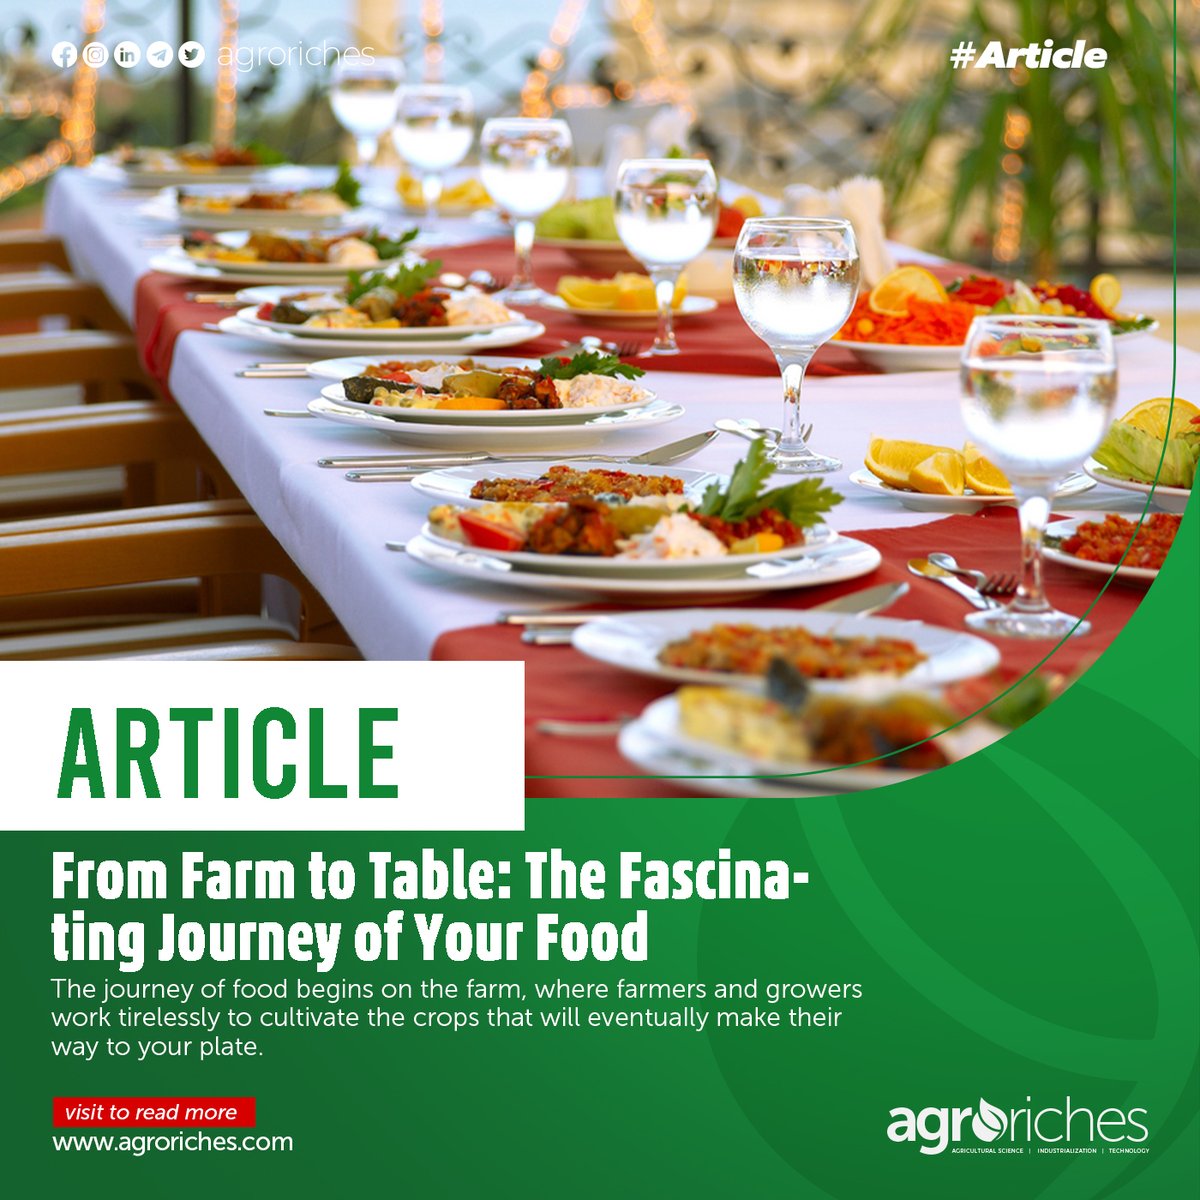 The journey your foods go through.
Visit our website, agroriches.com to read more.

#agroriches #agriculturaltrends #agriculturenews #african #women #agricultureinghana #ghana #articles #farming #growth #food #agriculture #technology